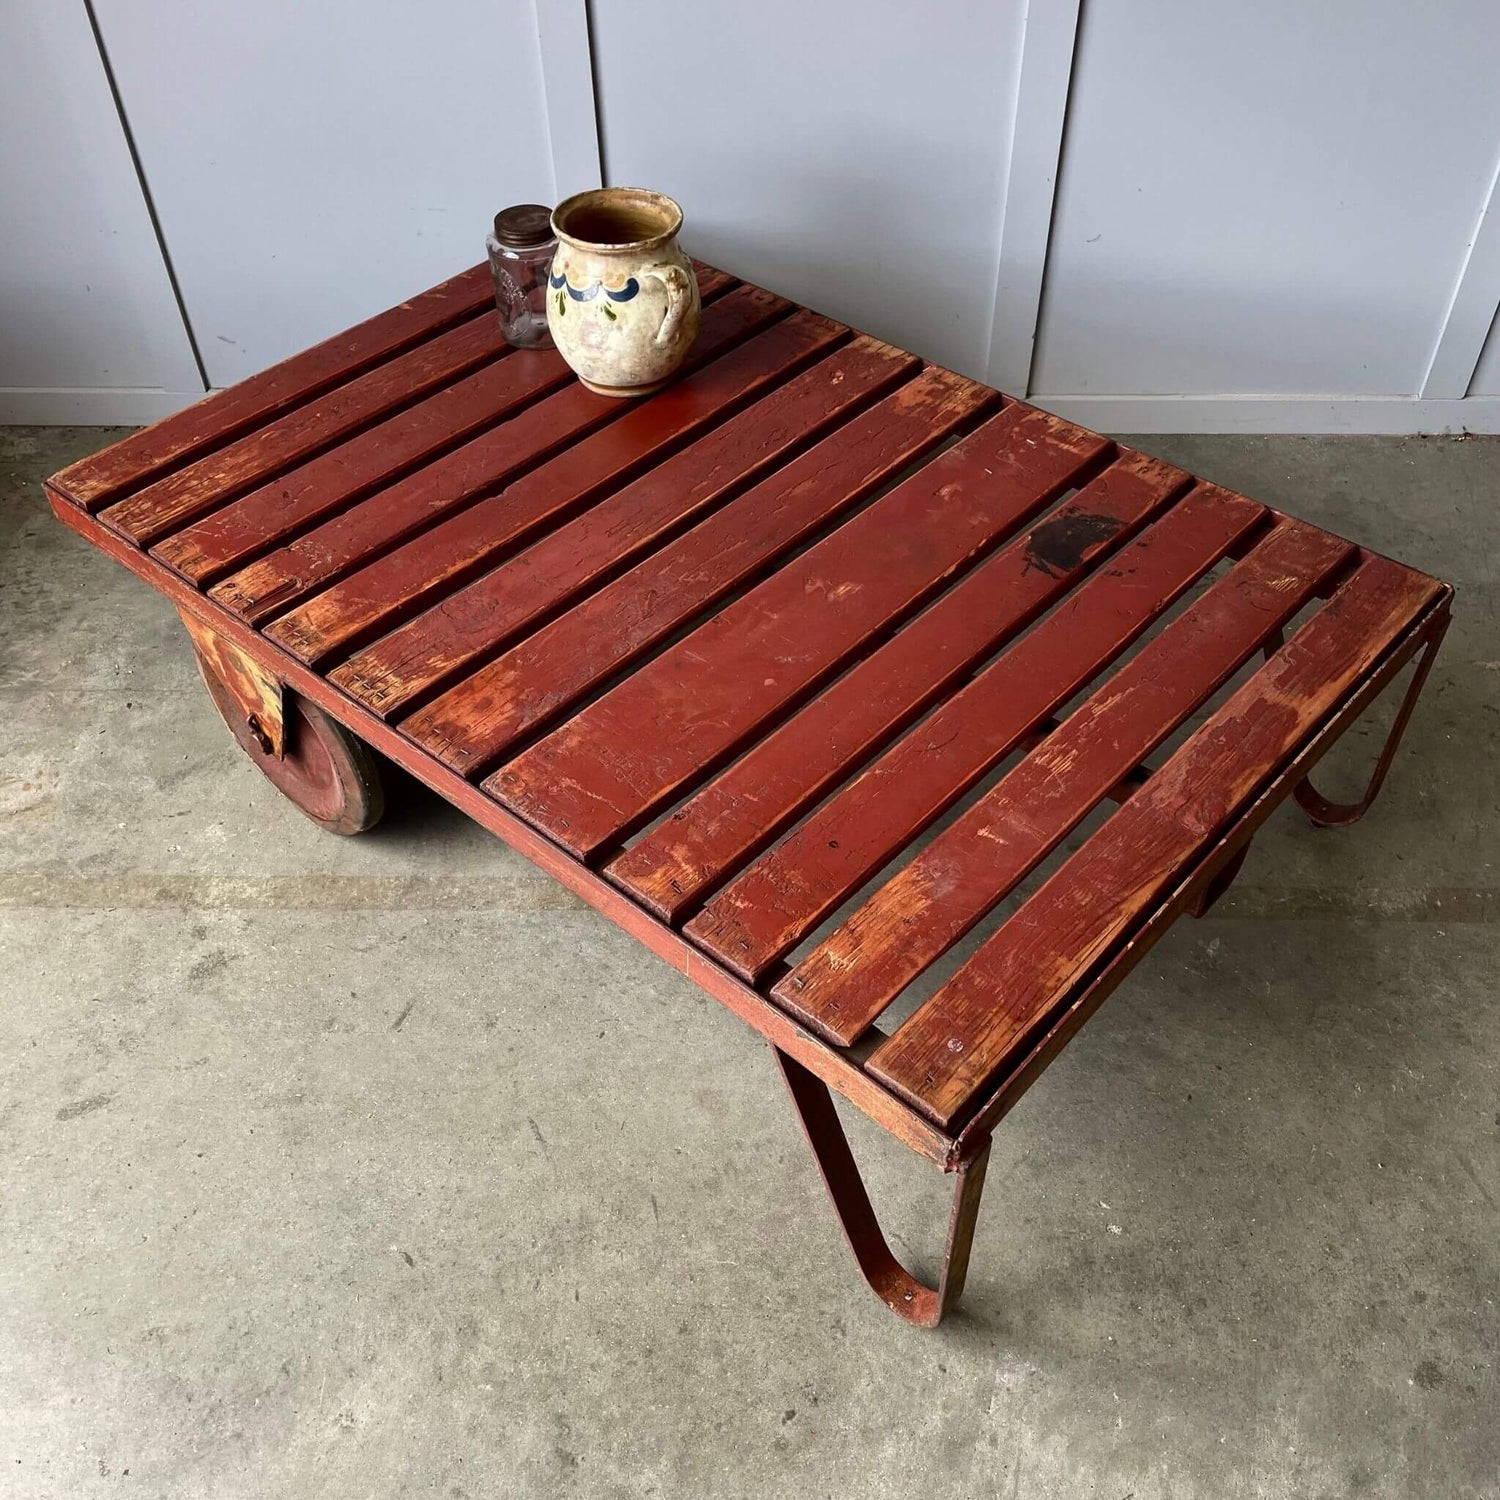 Top of a vintage industrial coffee table